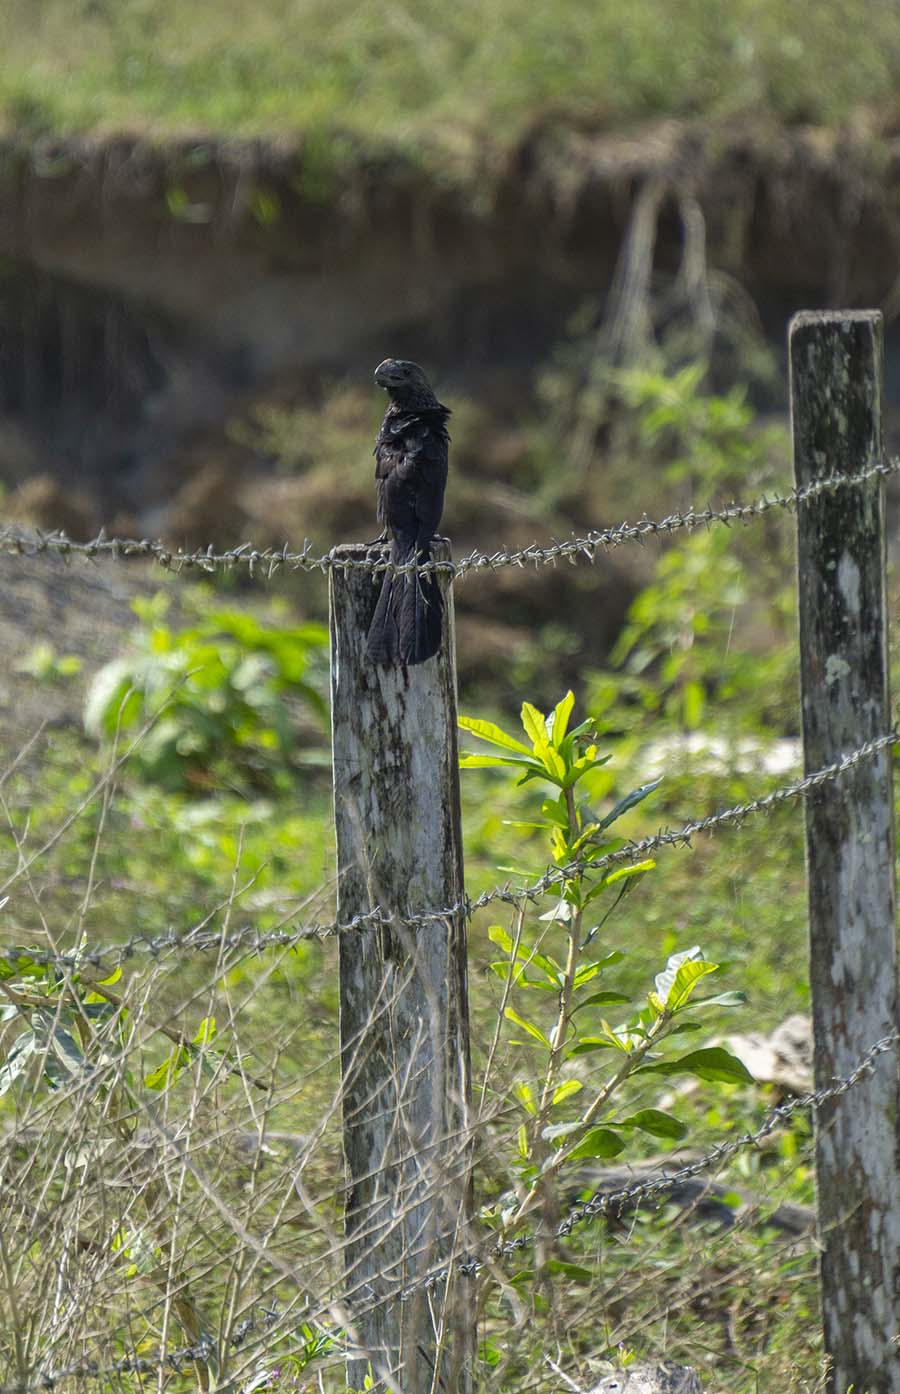 Smooth-billed Ani by a Pasture